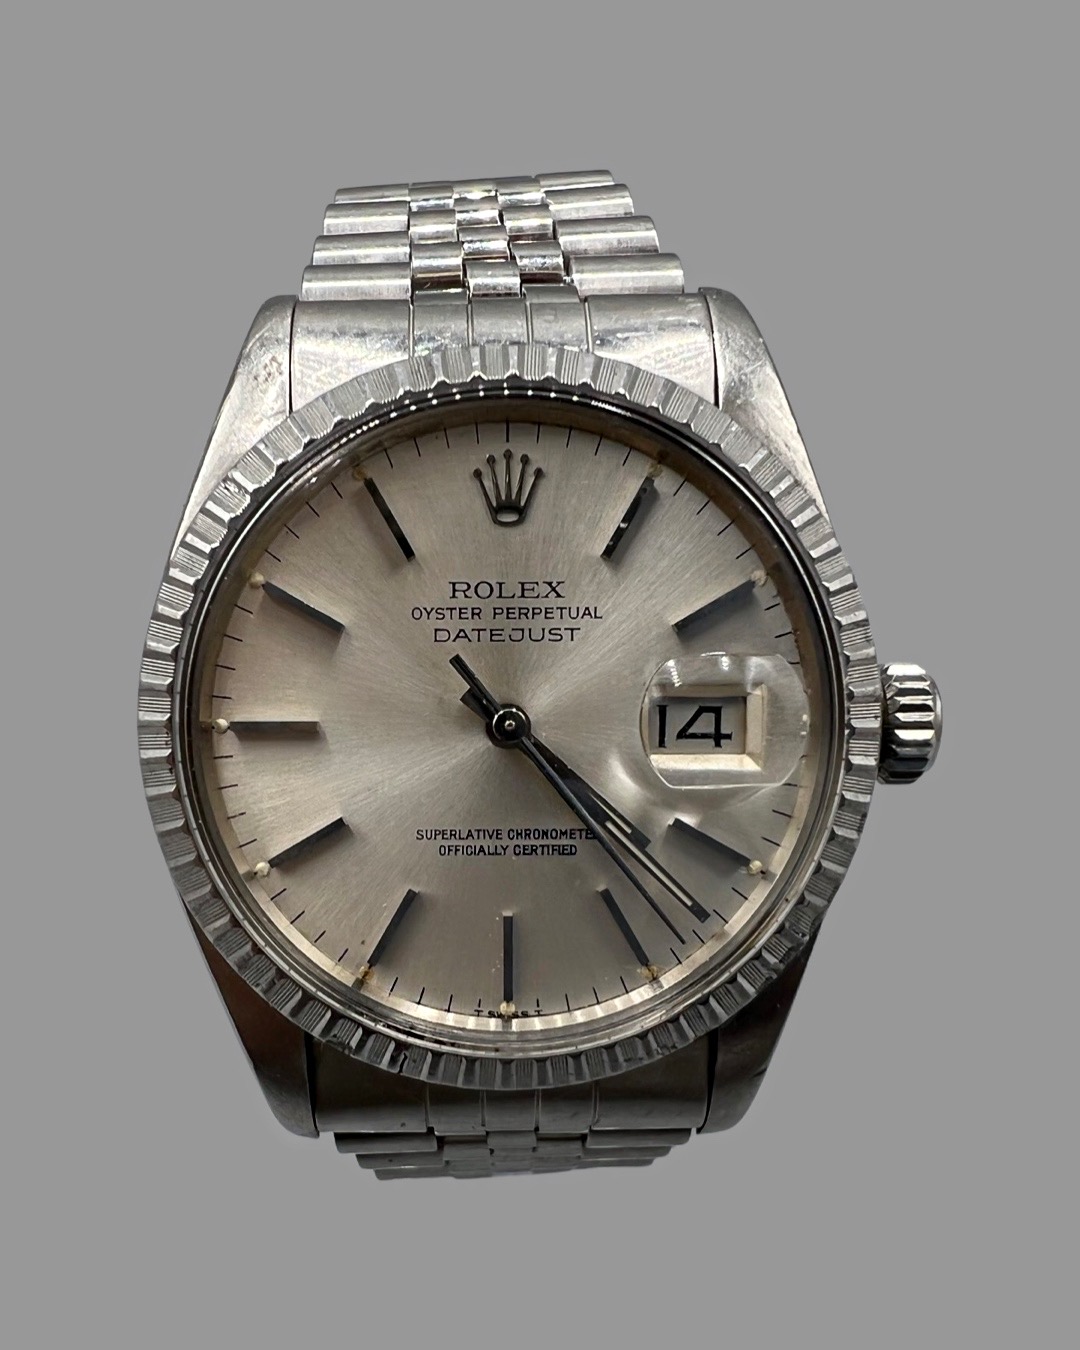 Rolex Gents Stainless Steel Datejust 1983 with Box & Papers - Good Working Order - Image 2 of 2